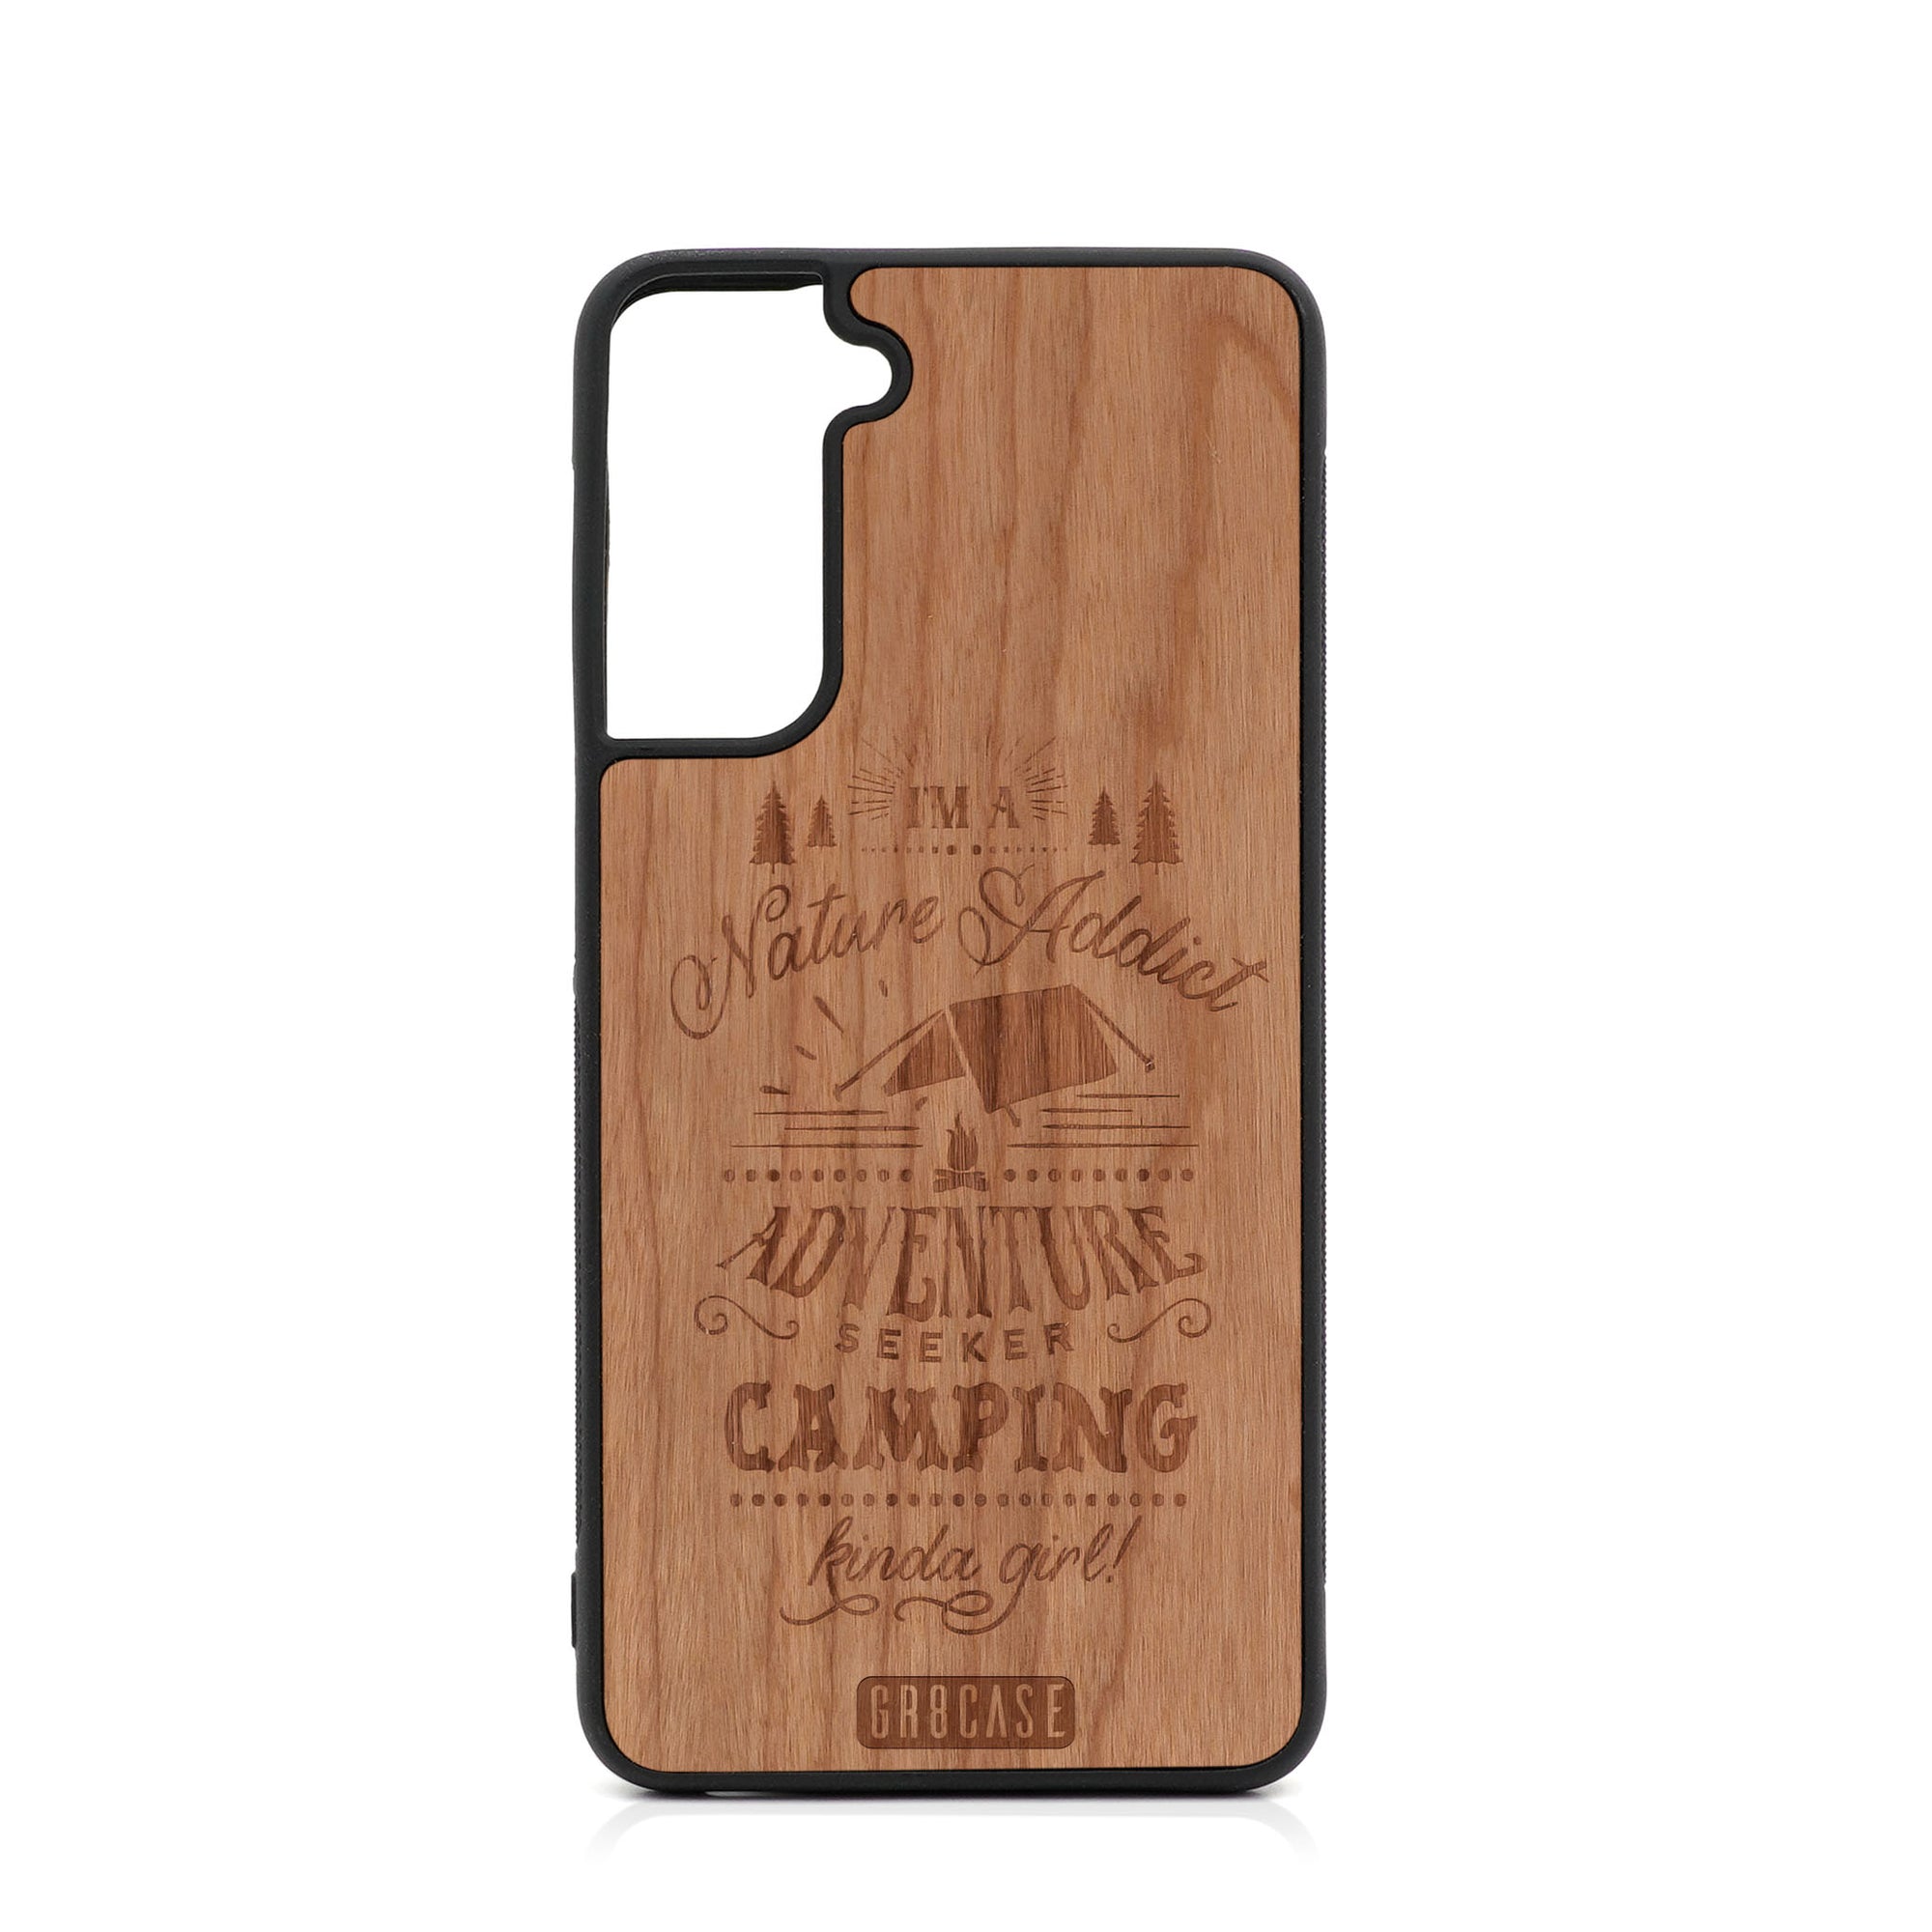 I'm A Nature Addict Adventure Seeker Camping Kinda Girl Design Wood Case For Samsung Galaxy S21 Plus 5G